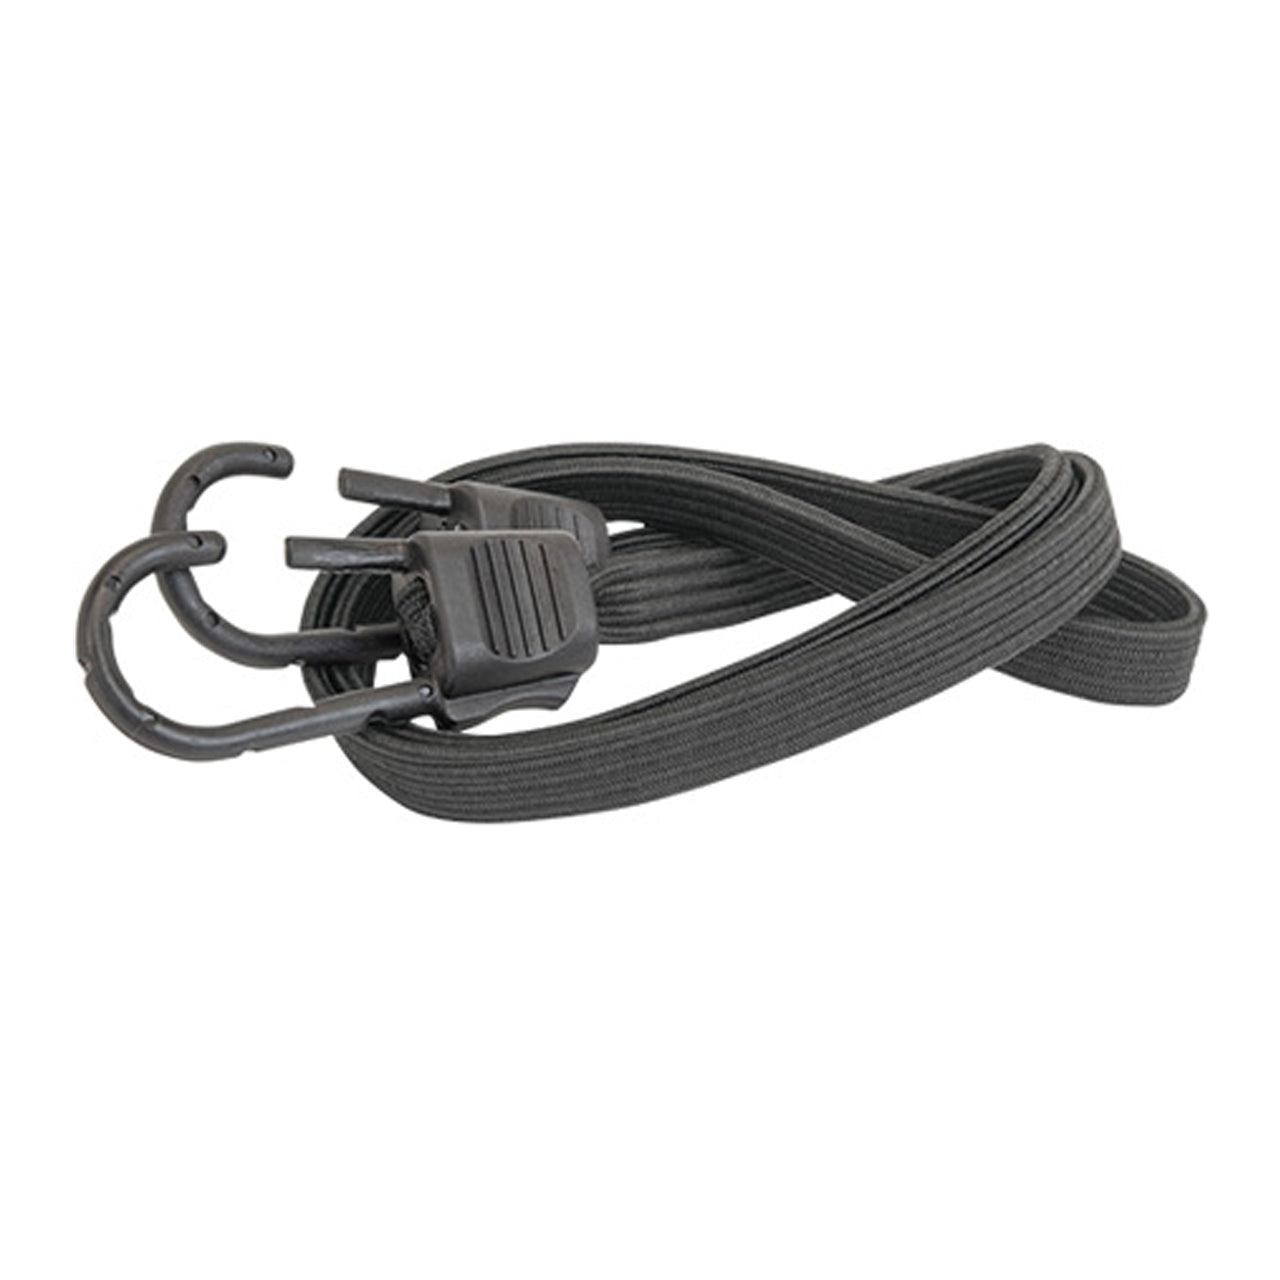 HOOKED BUNGEE STRAP